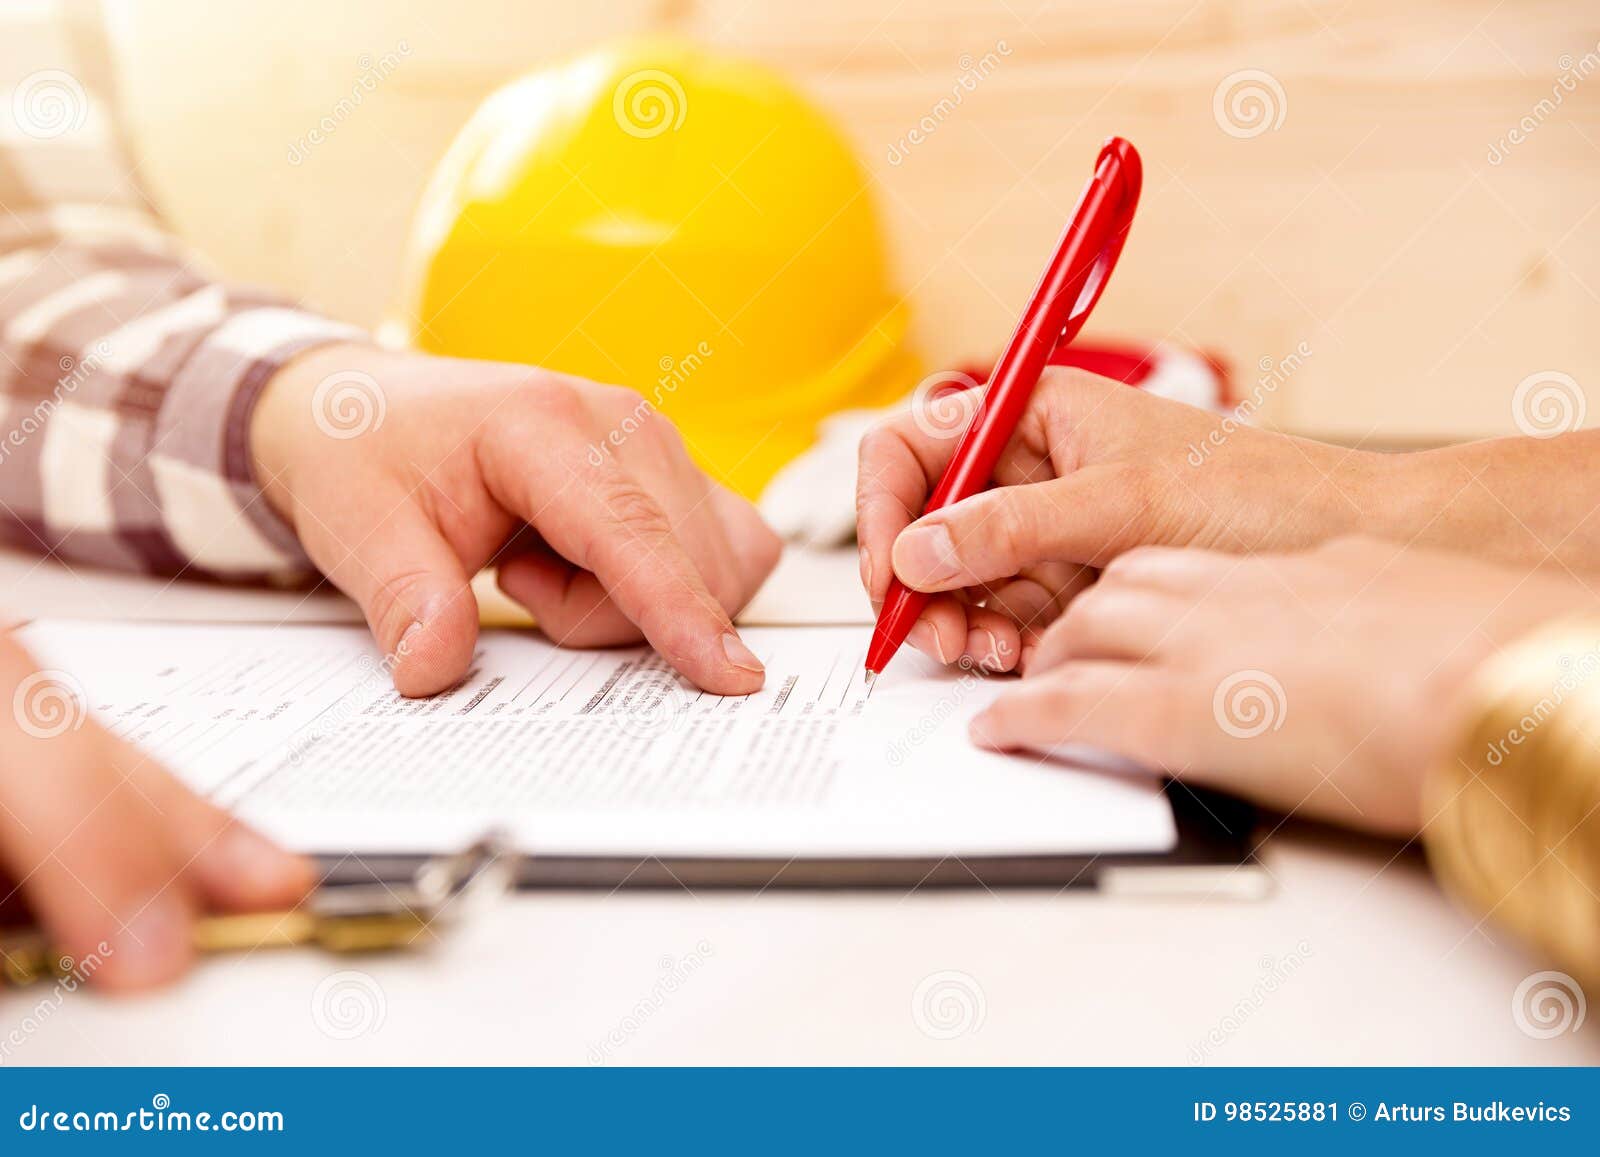 woman signing construction contract with contractor to build a house